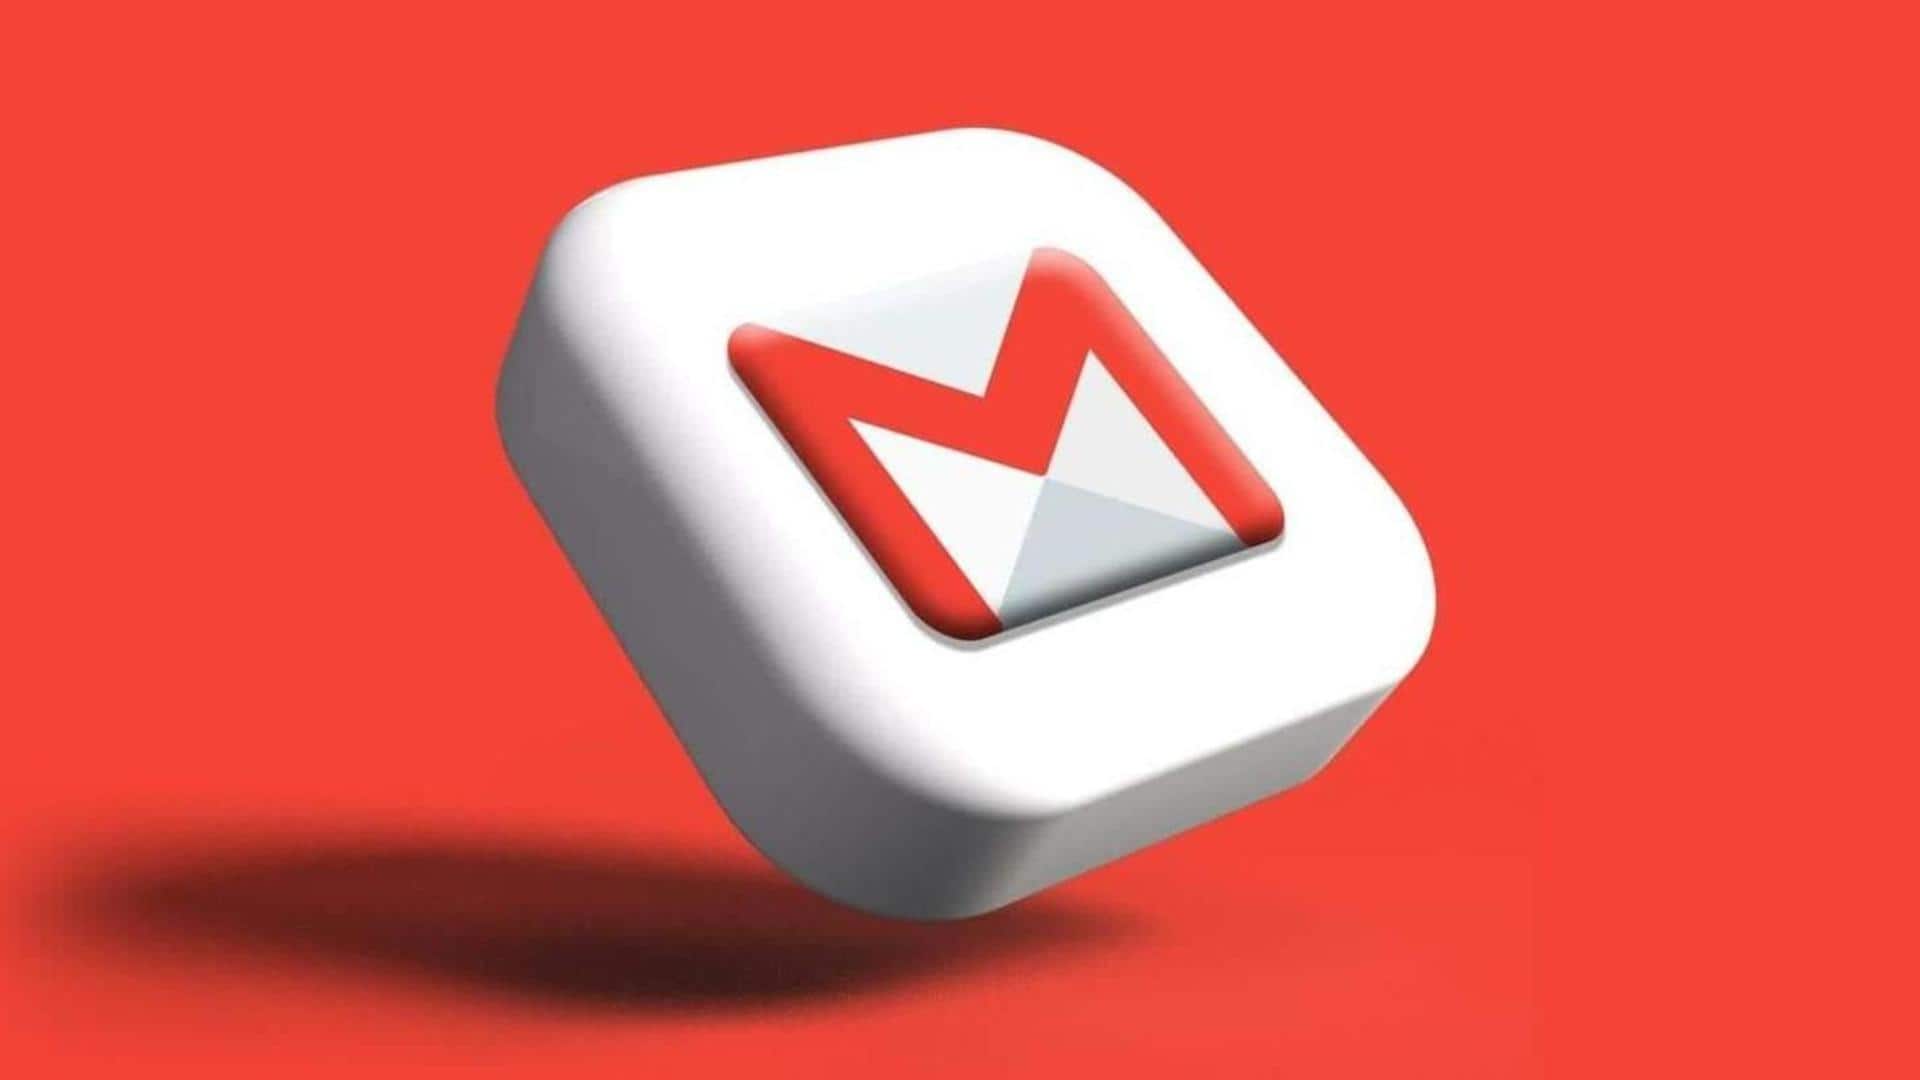 Major outage: Gmail is down for thousands worldwide